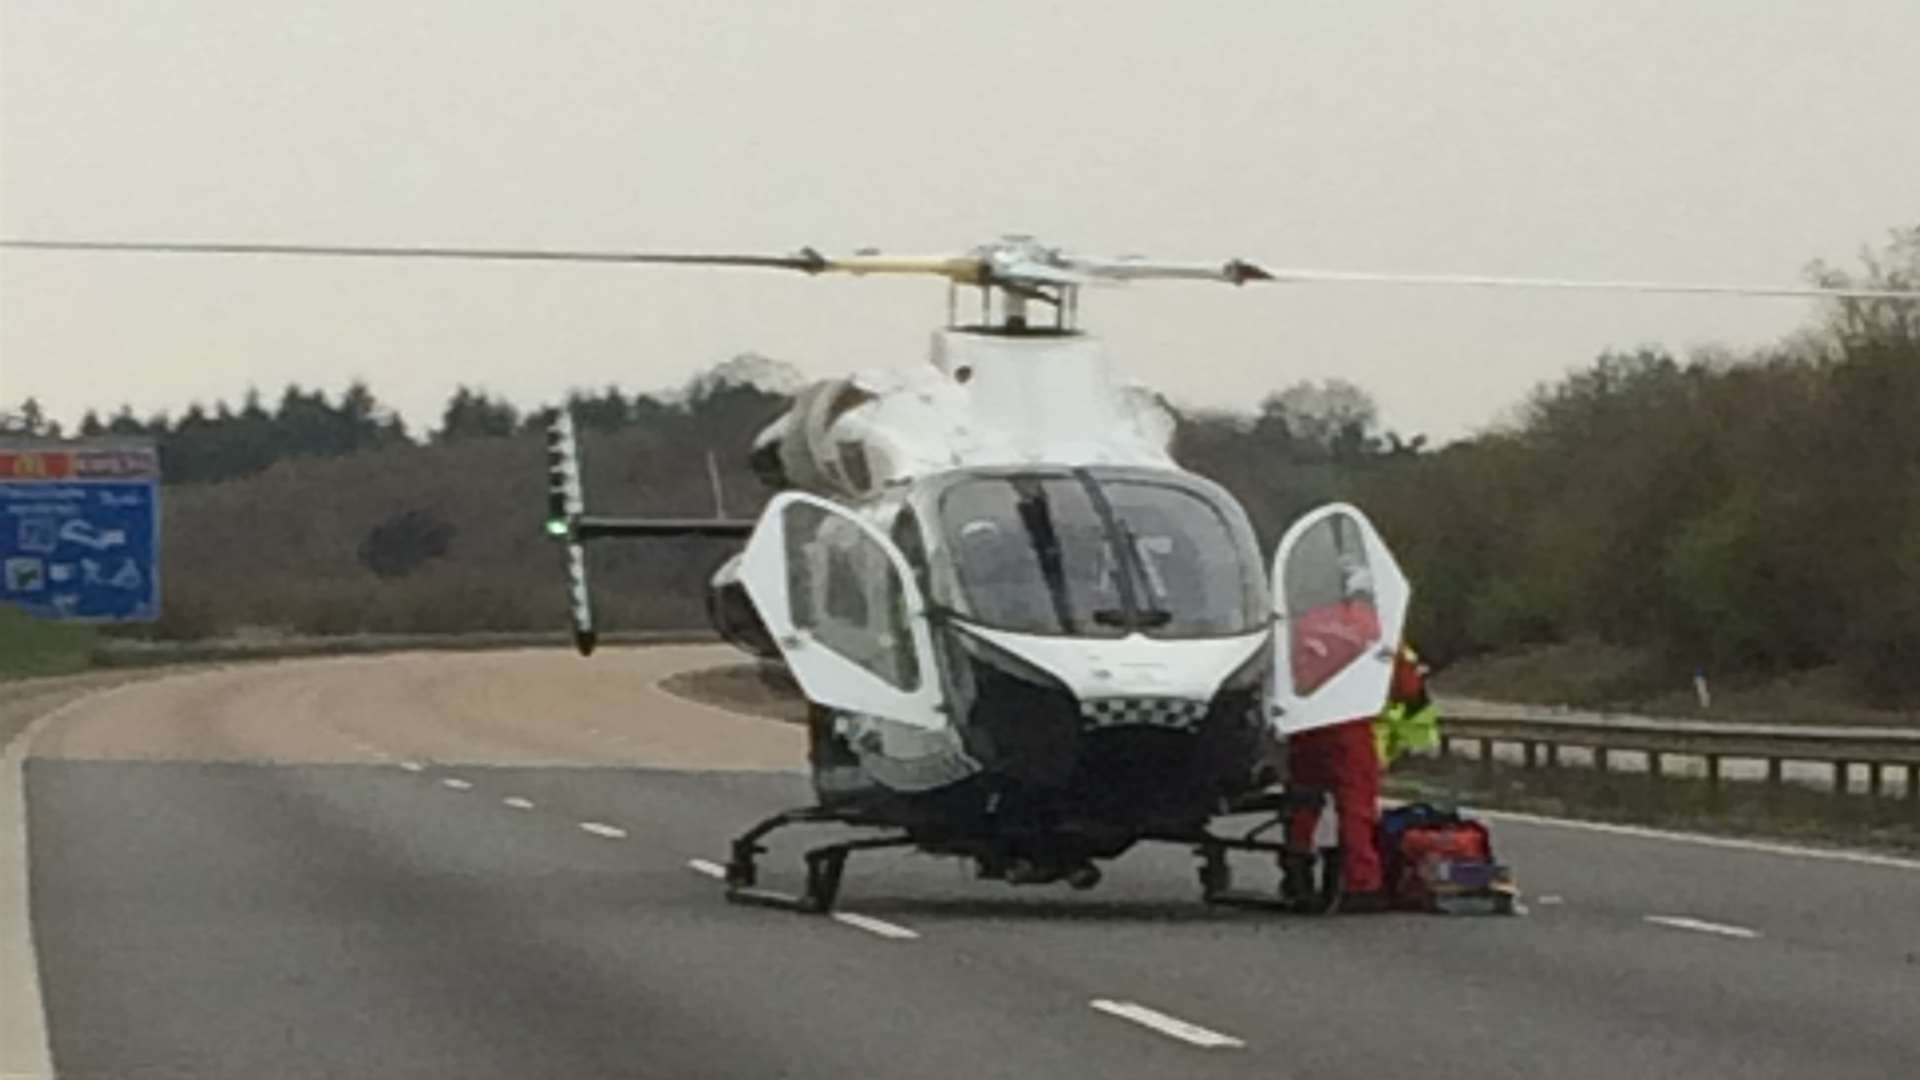 The air ambulance lands on the M20. Picture: Claire Reeves